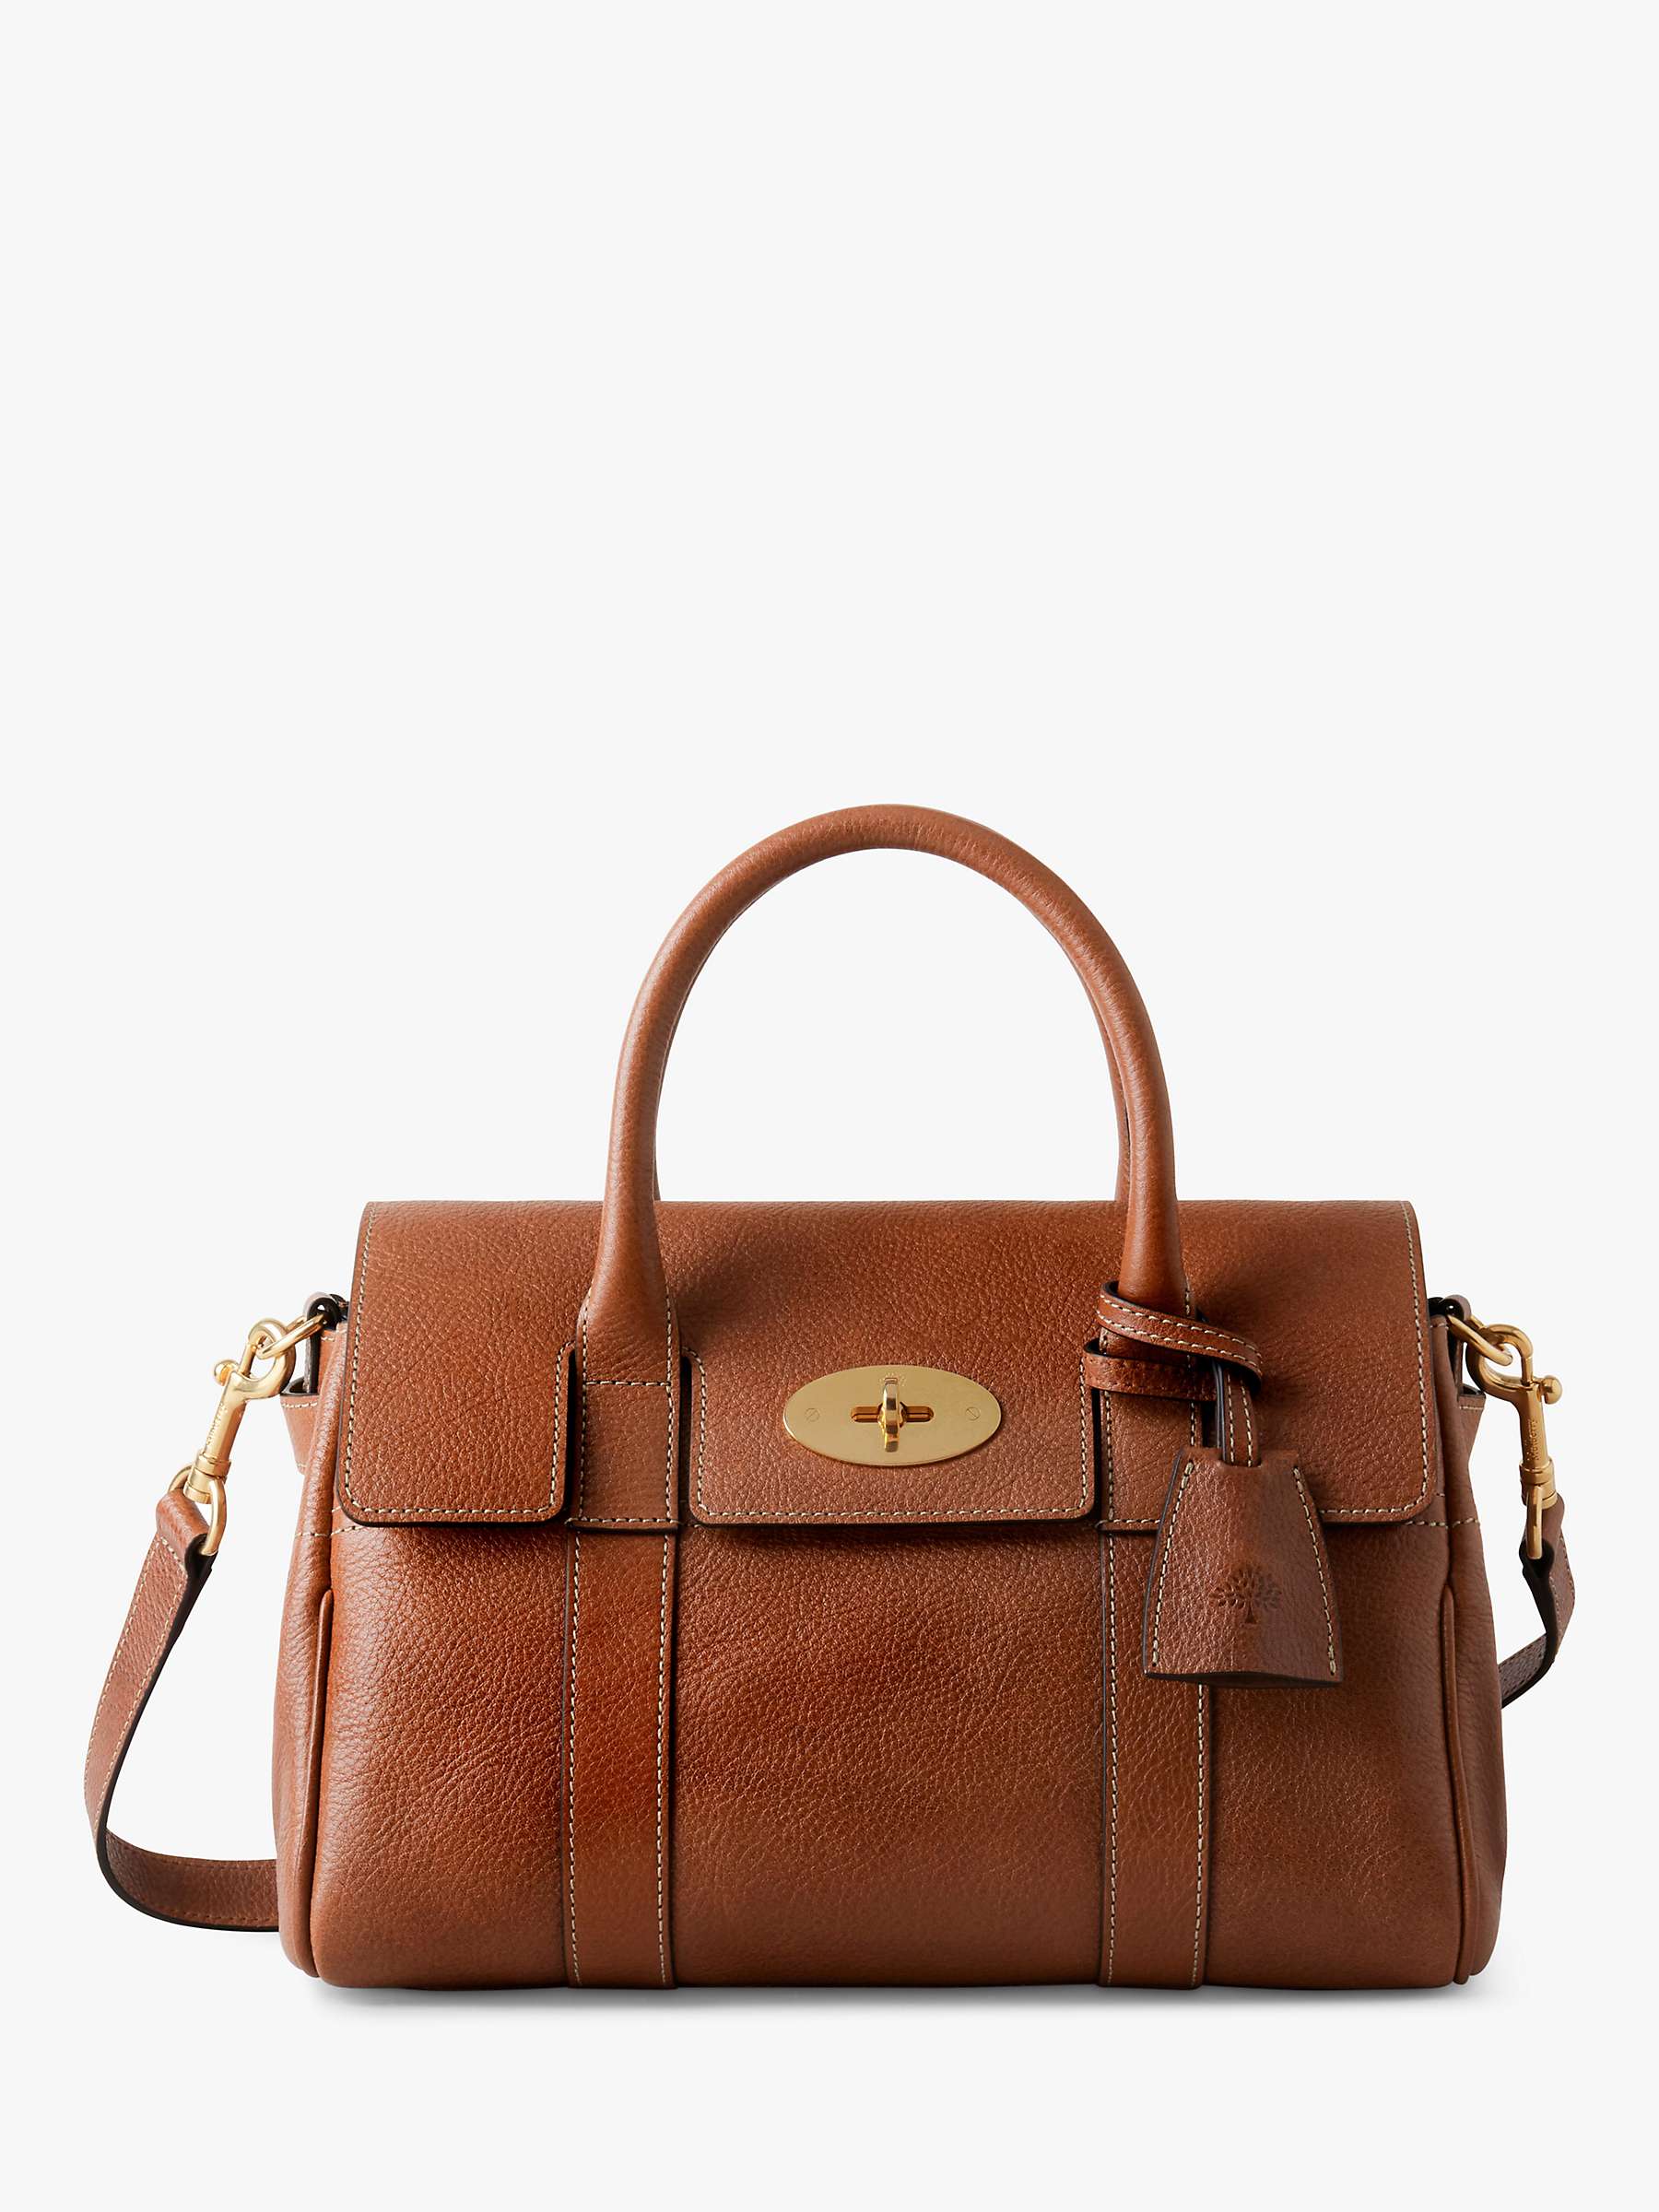 Buy Mulberry Bayswater Natural Vegetable Tanned Leather Satchel, Oak Online at johnlewis.com